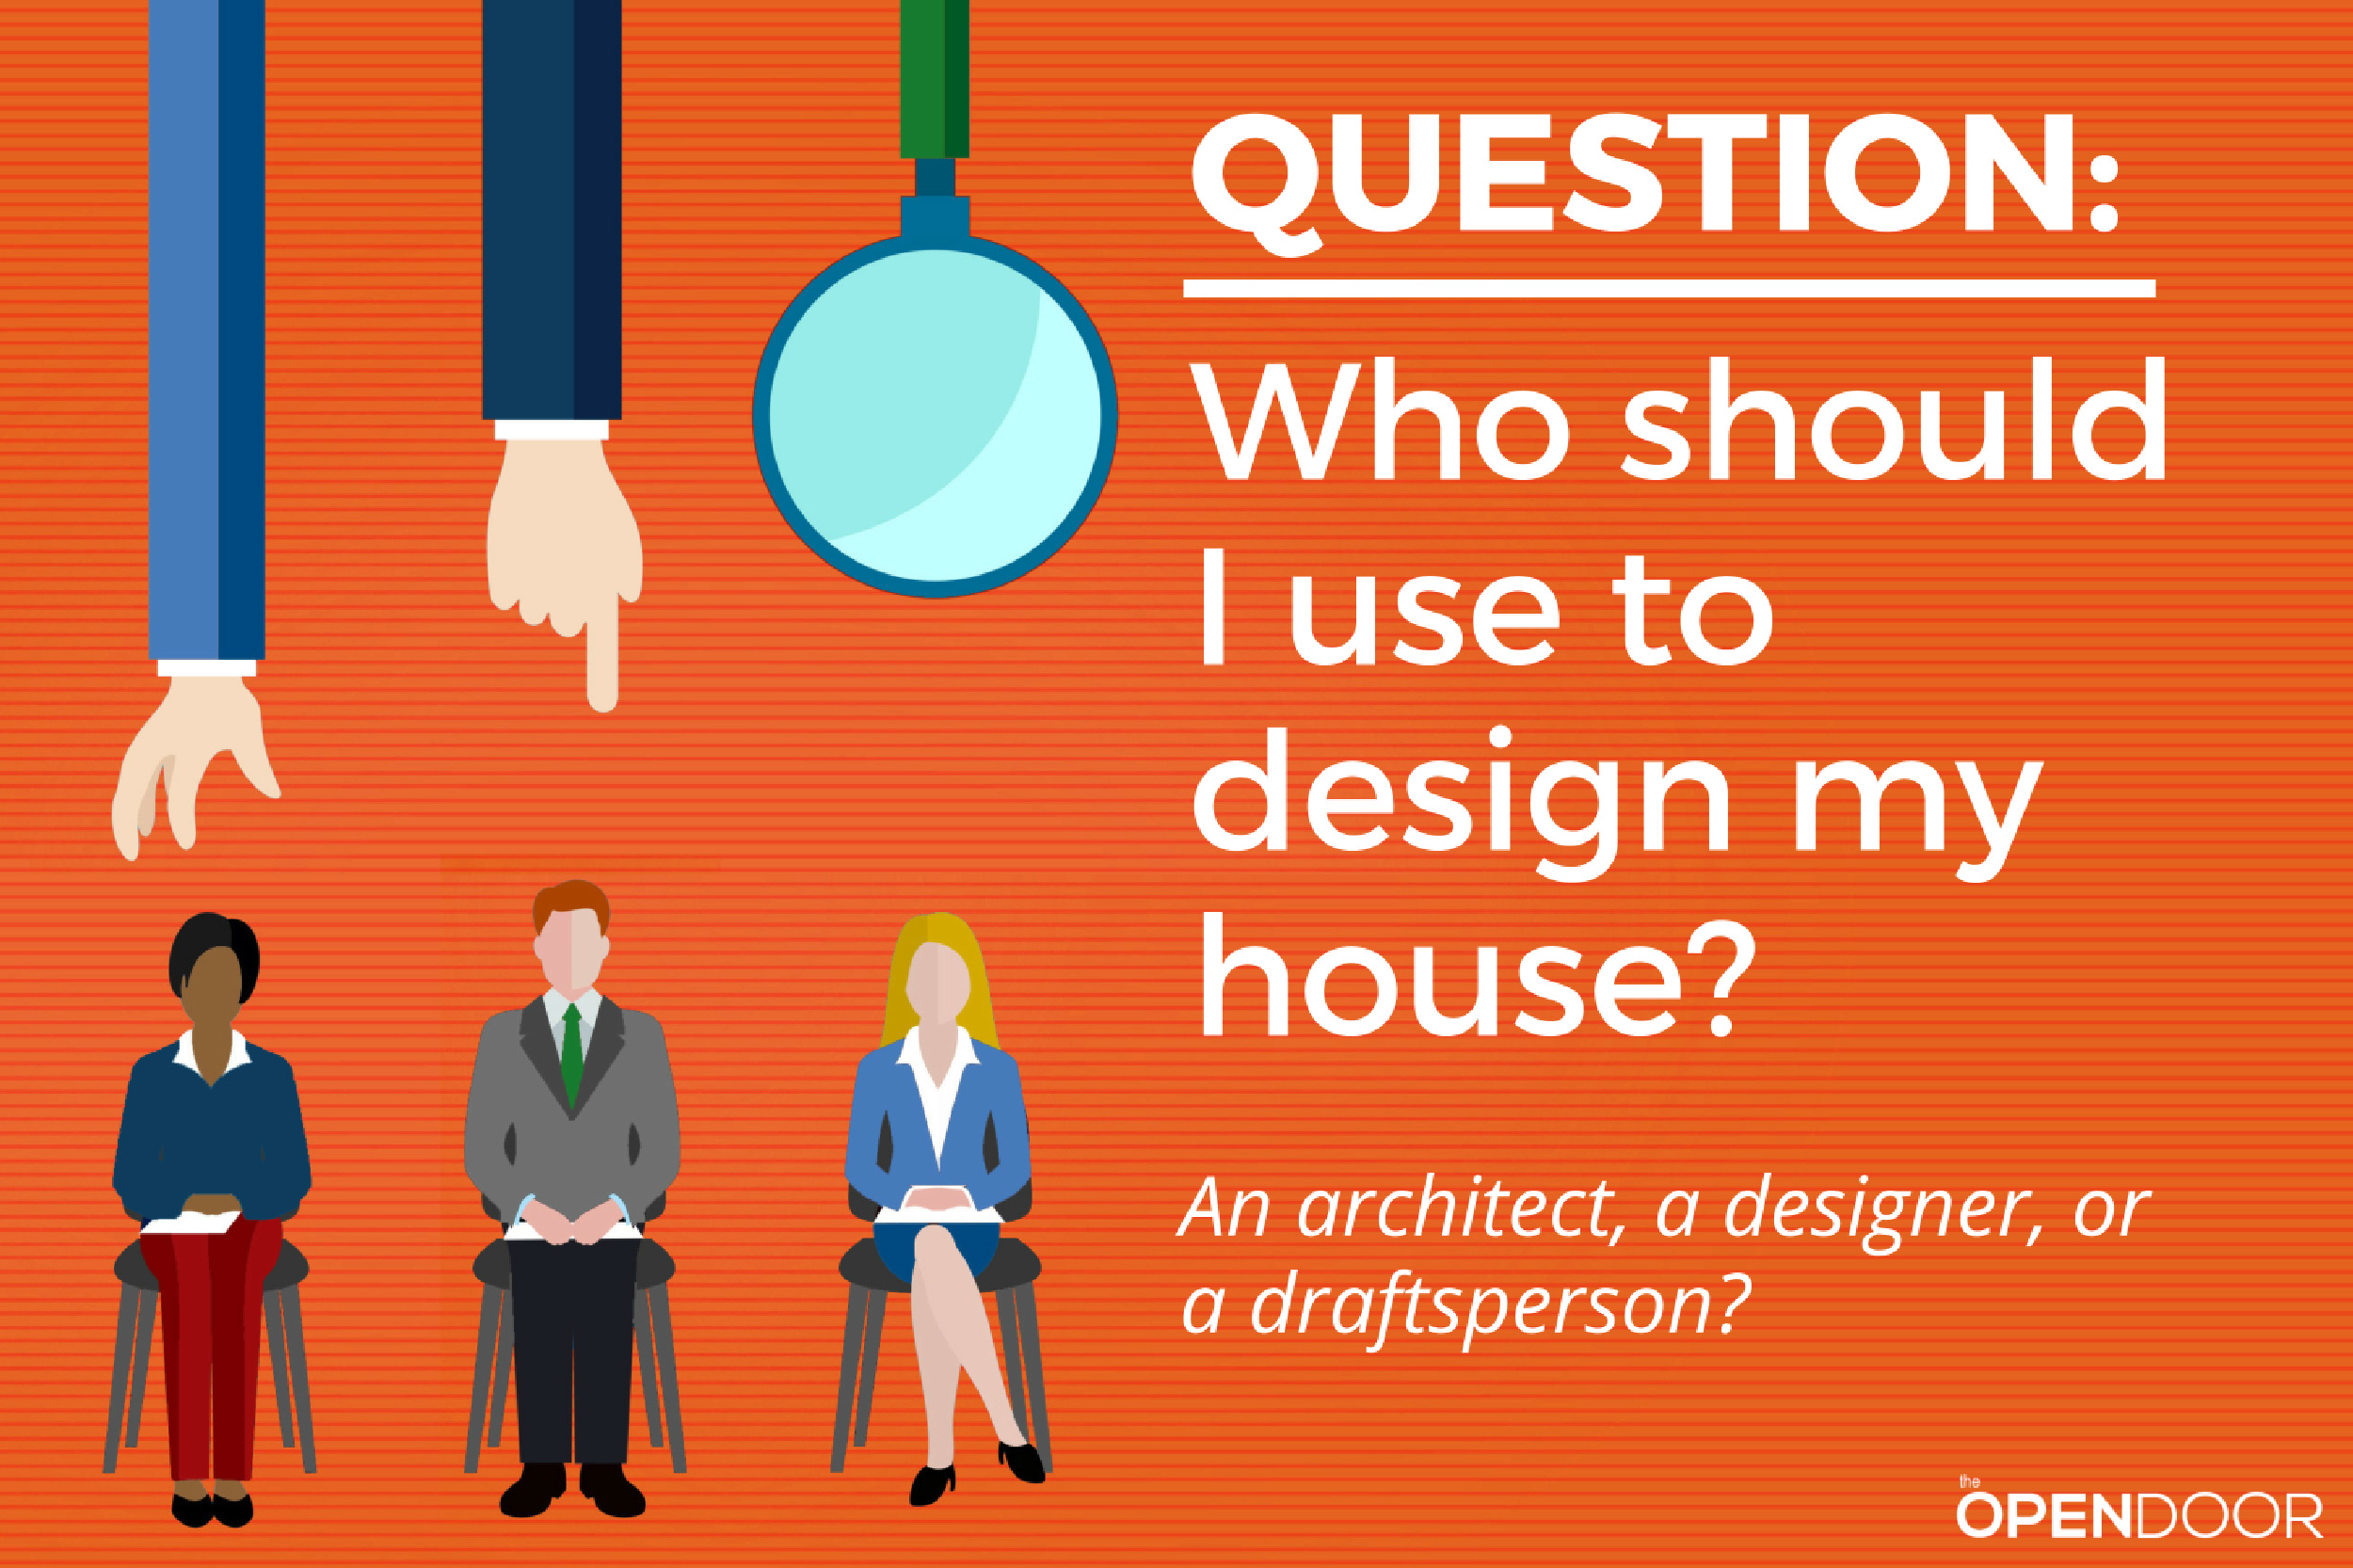 Who should I use to design my house - an architect, designer, or draftsperson?